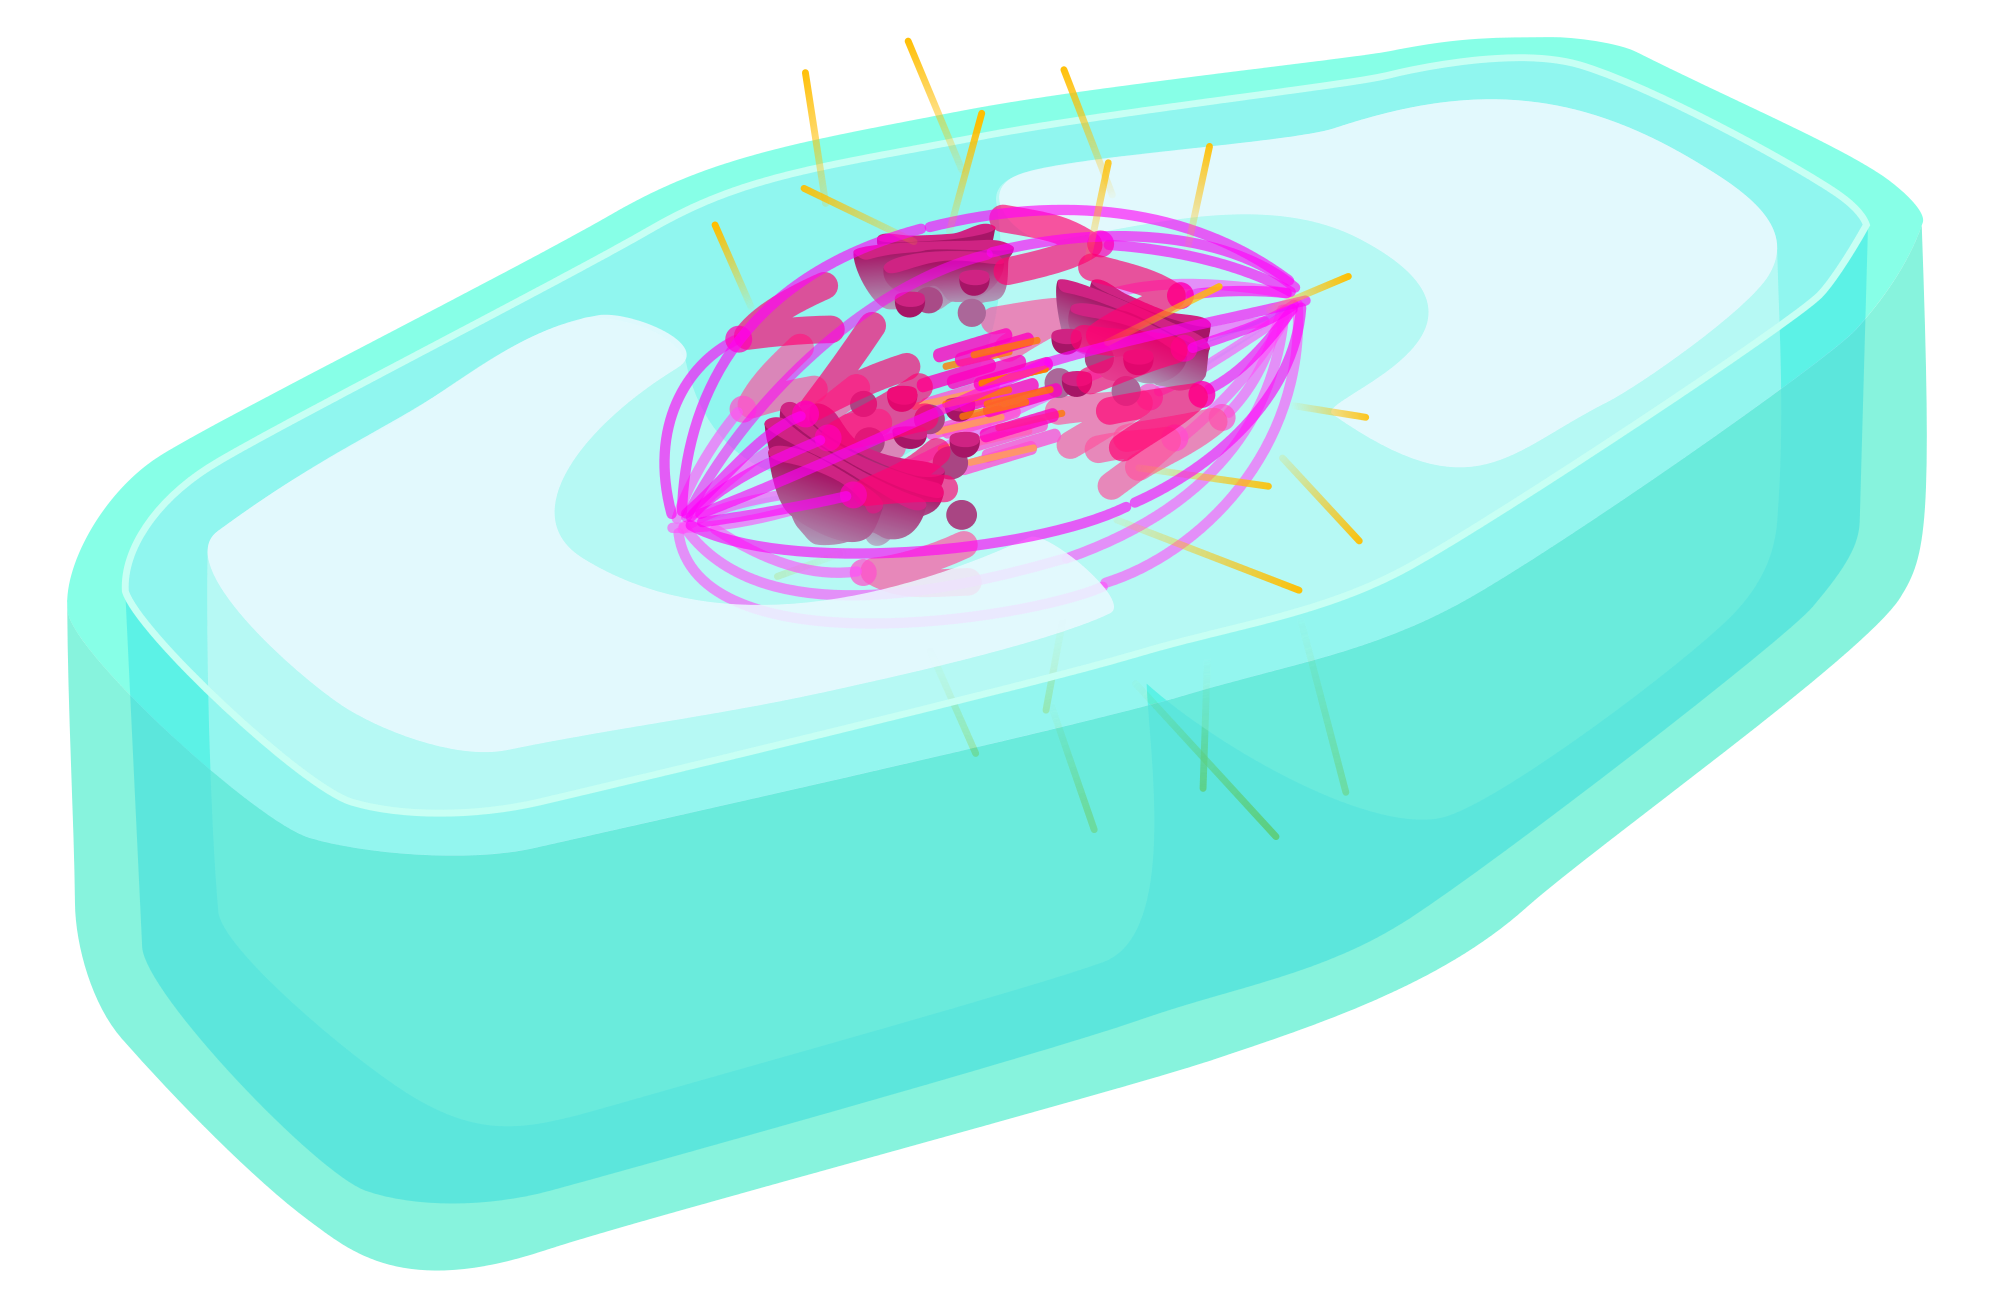 File:Animal cell  - Wikimedia Commons